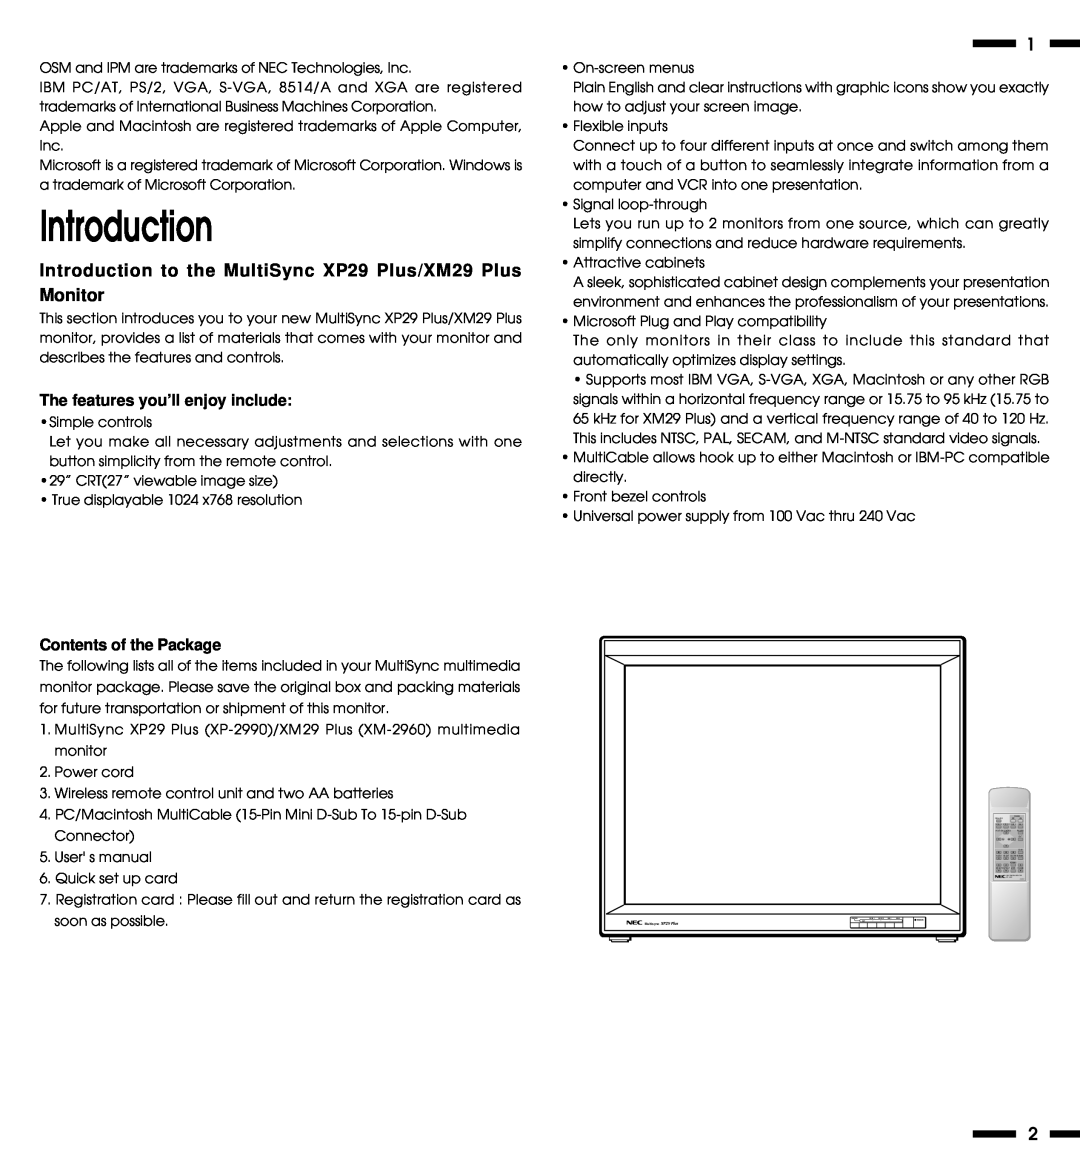 NEC XP29, XM29 Plus user manual Introduction, The features you’ll enjoy include, Contents of the Package, soon as possible 